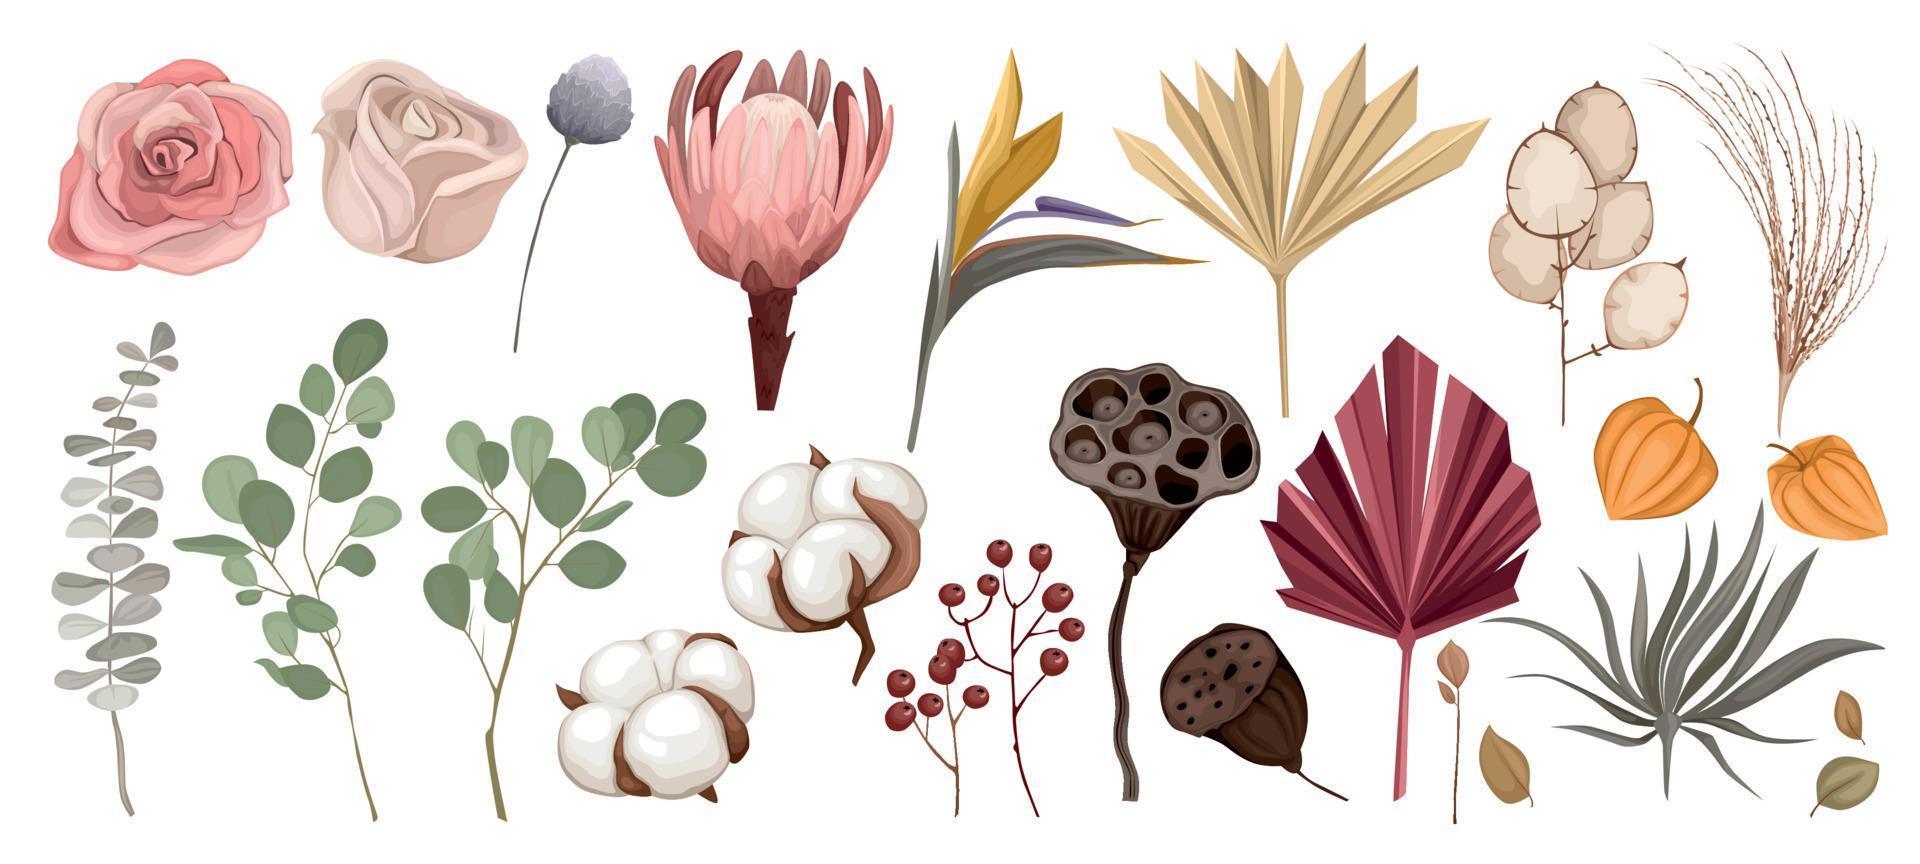 Dried Flowers Icon Set vector